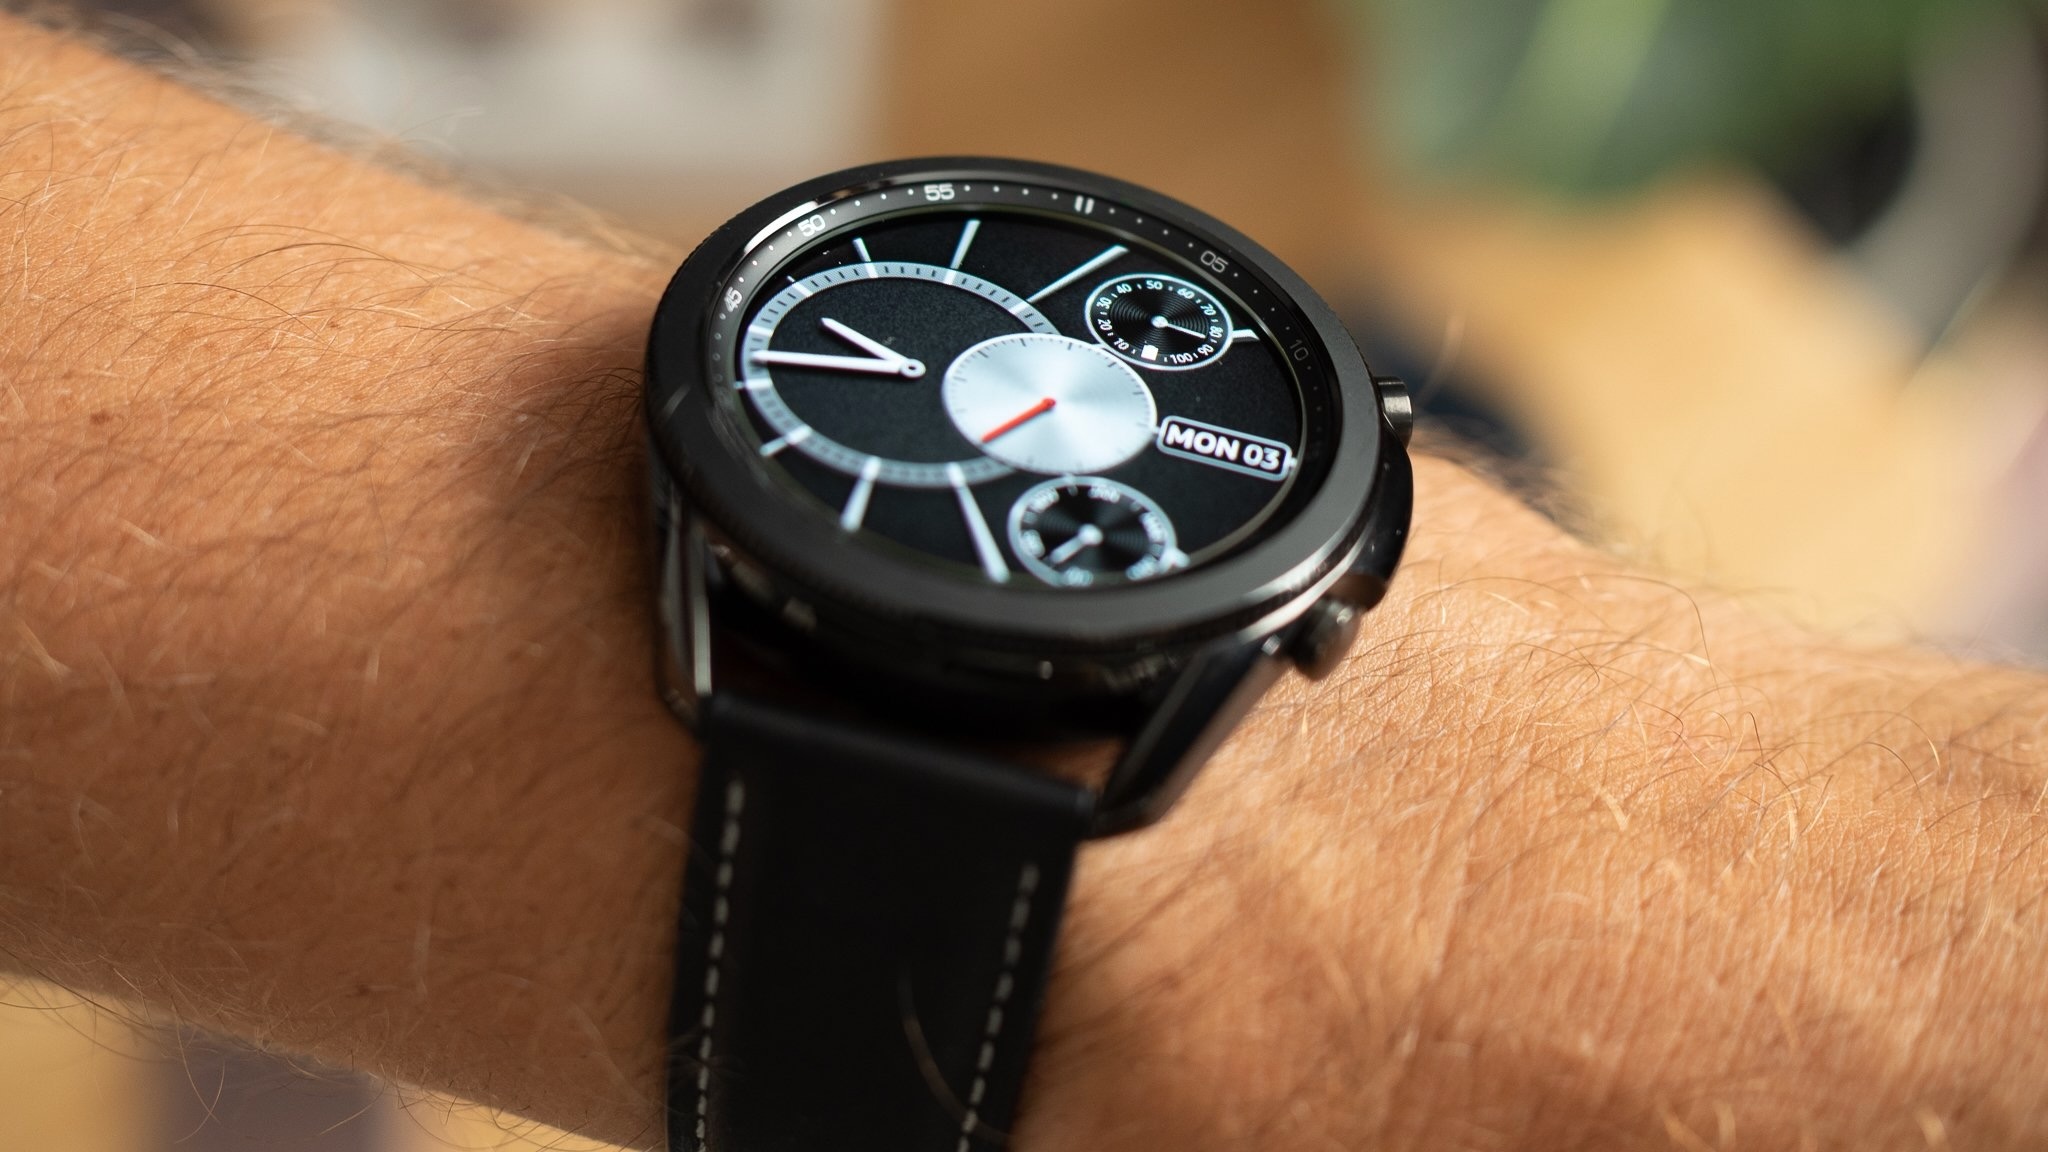 Close-up of the Samsung Galaxy Watch 3 watch face